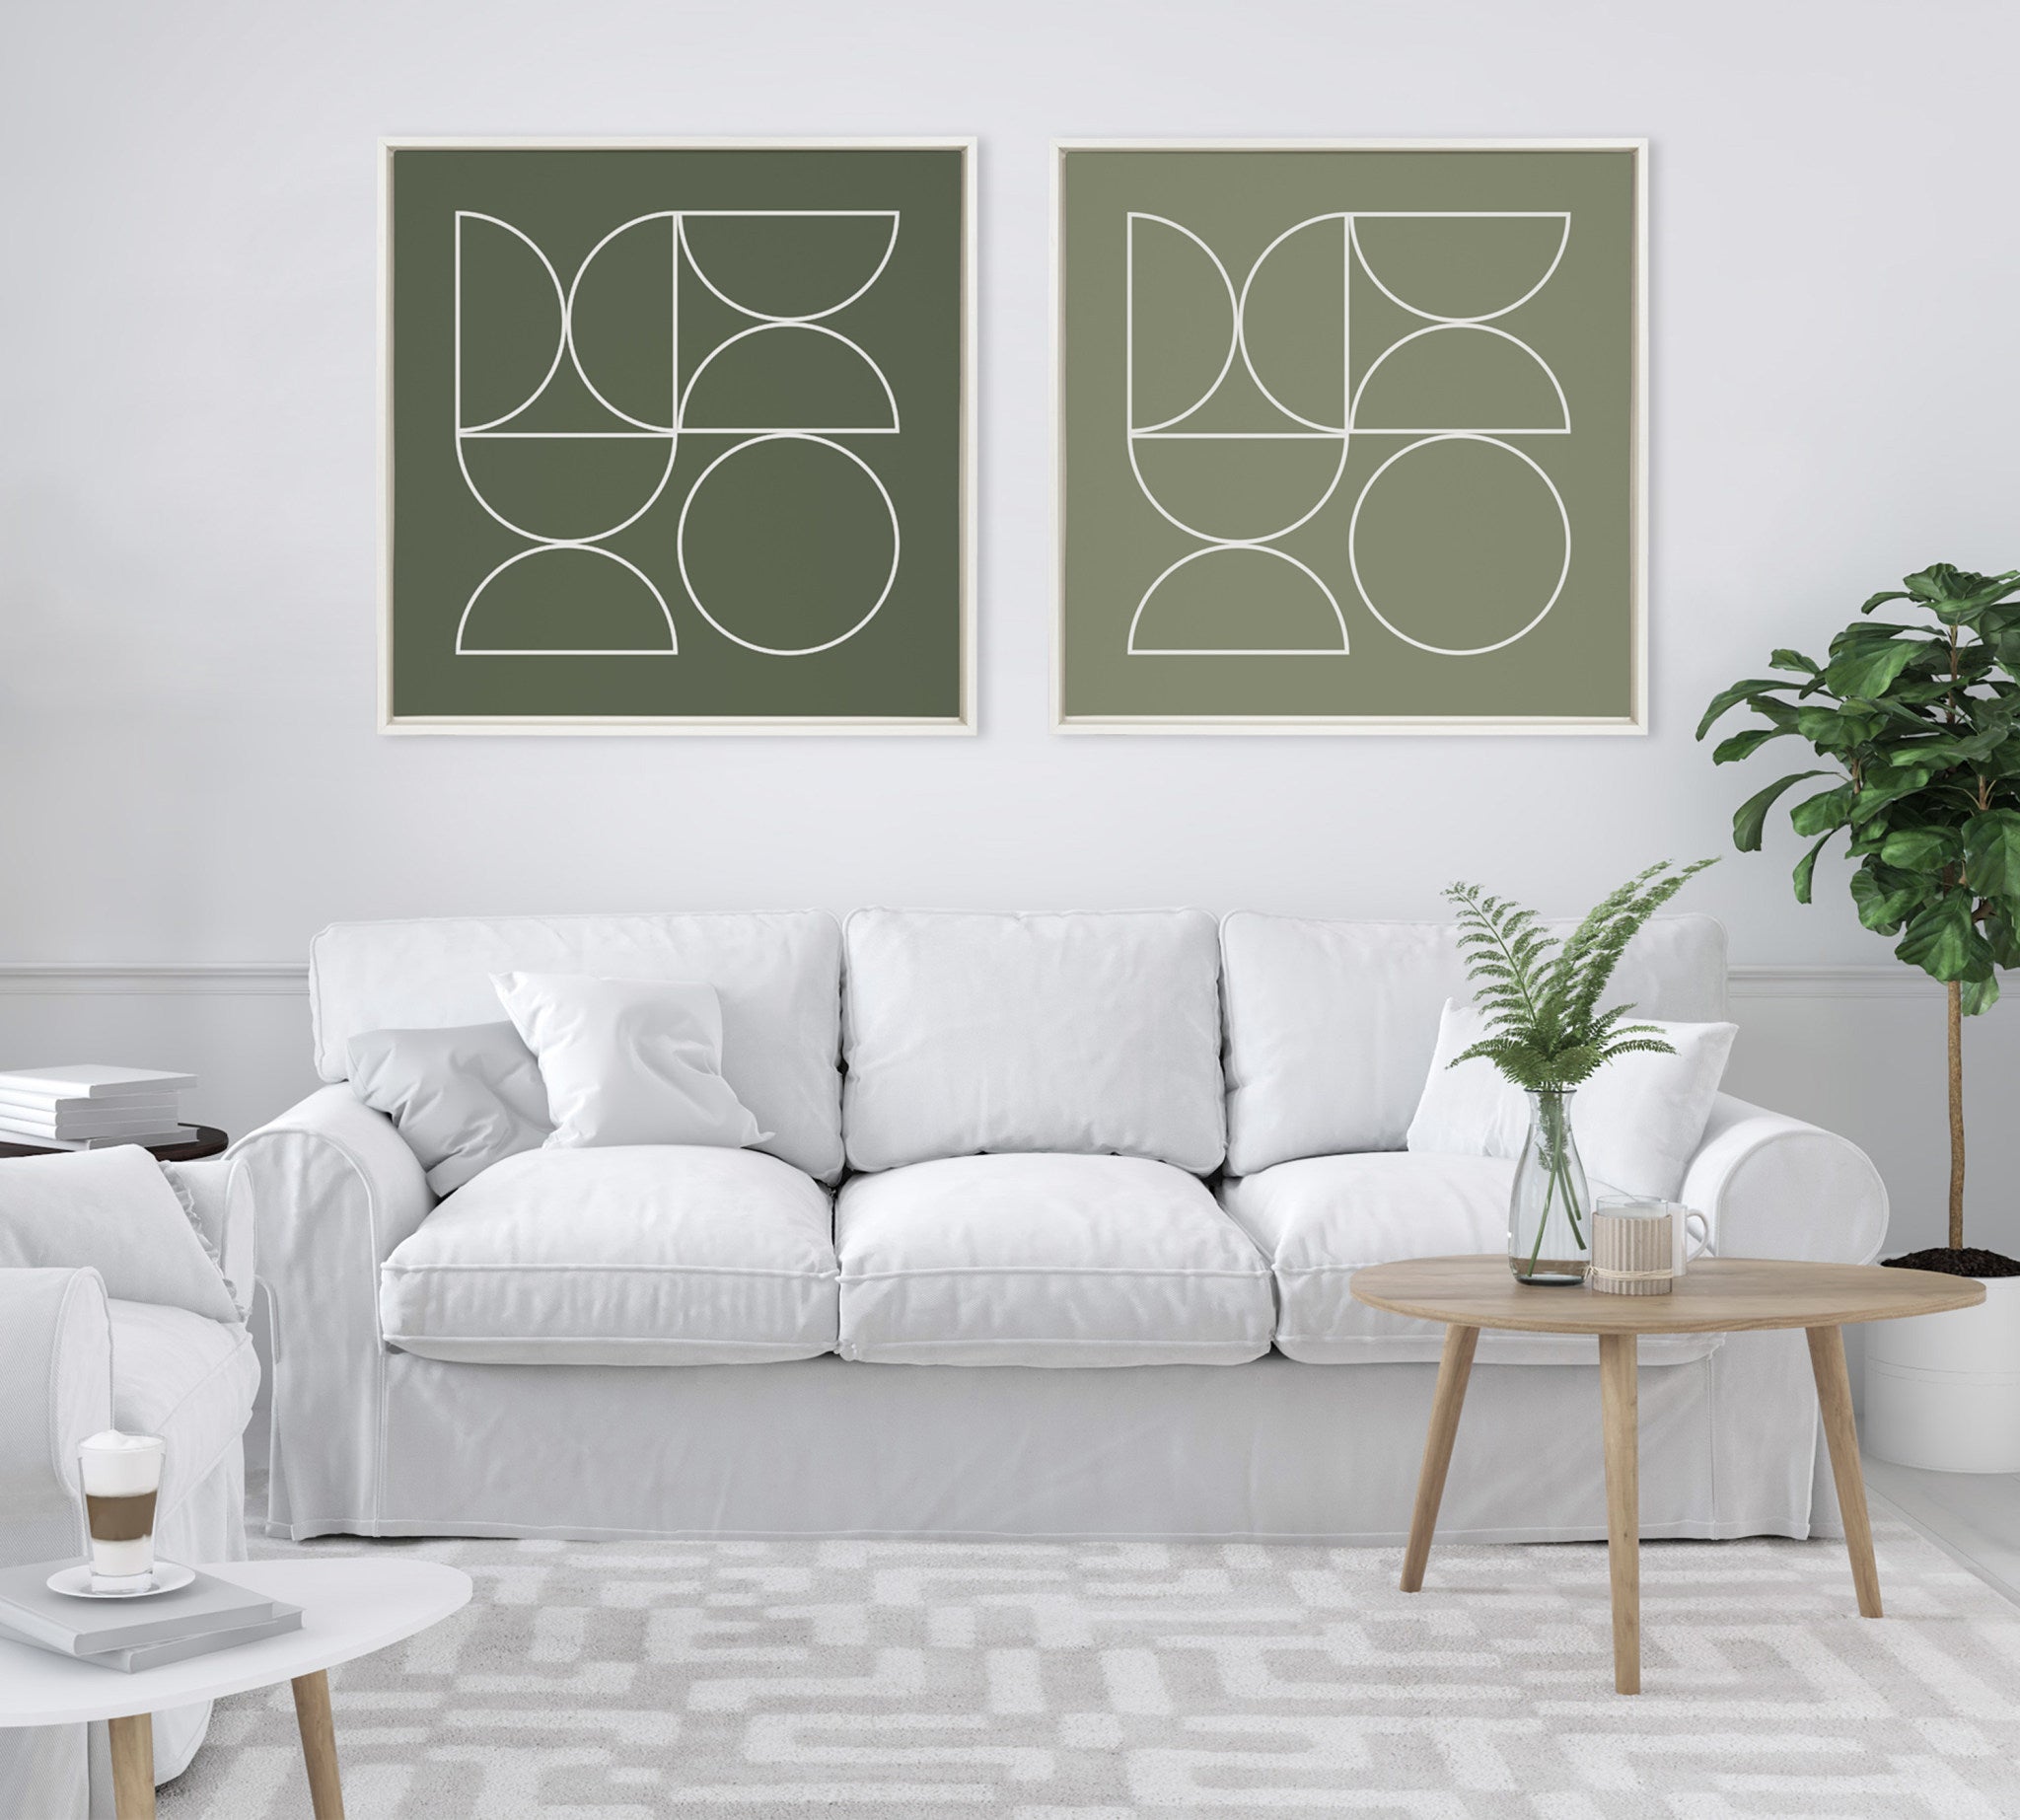 Sylvie Bold Vintage Geometric Line Art Olive Green Framed Canvas by The Creative Bunch Studio